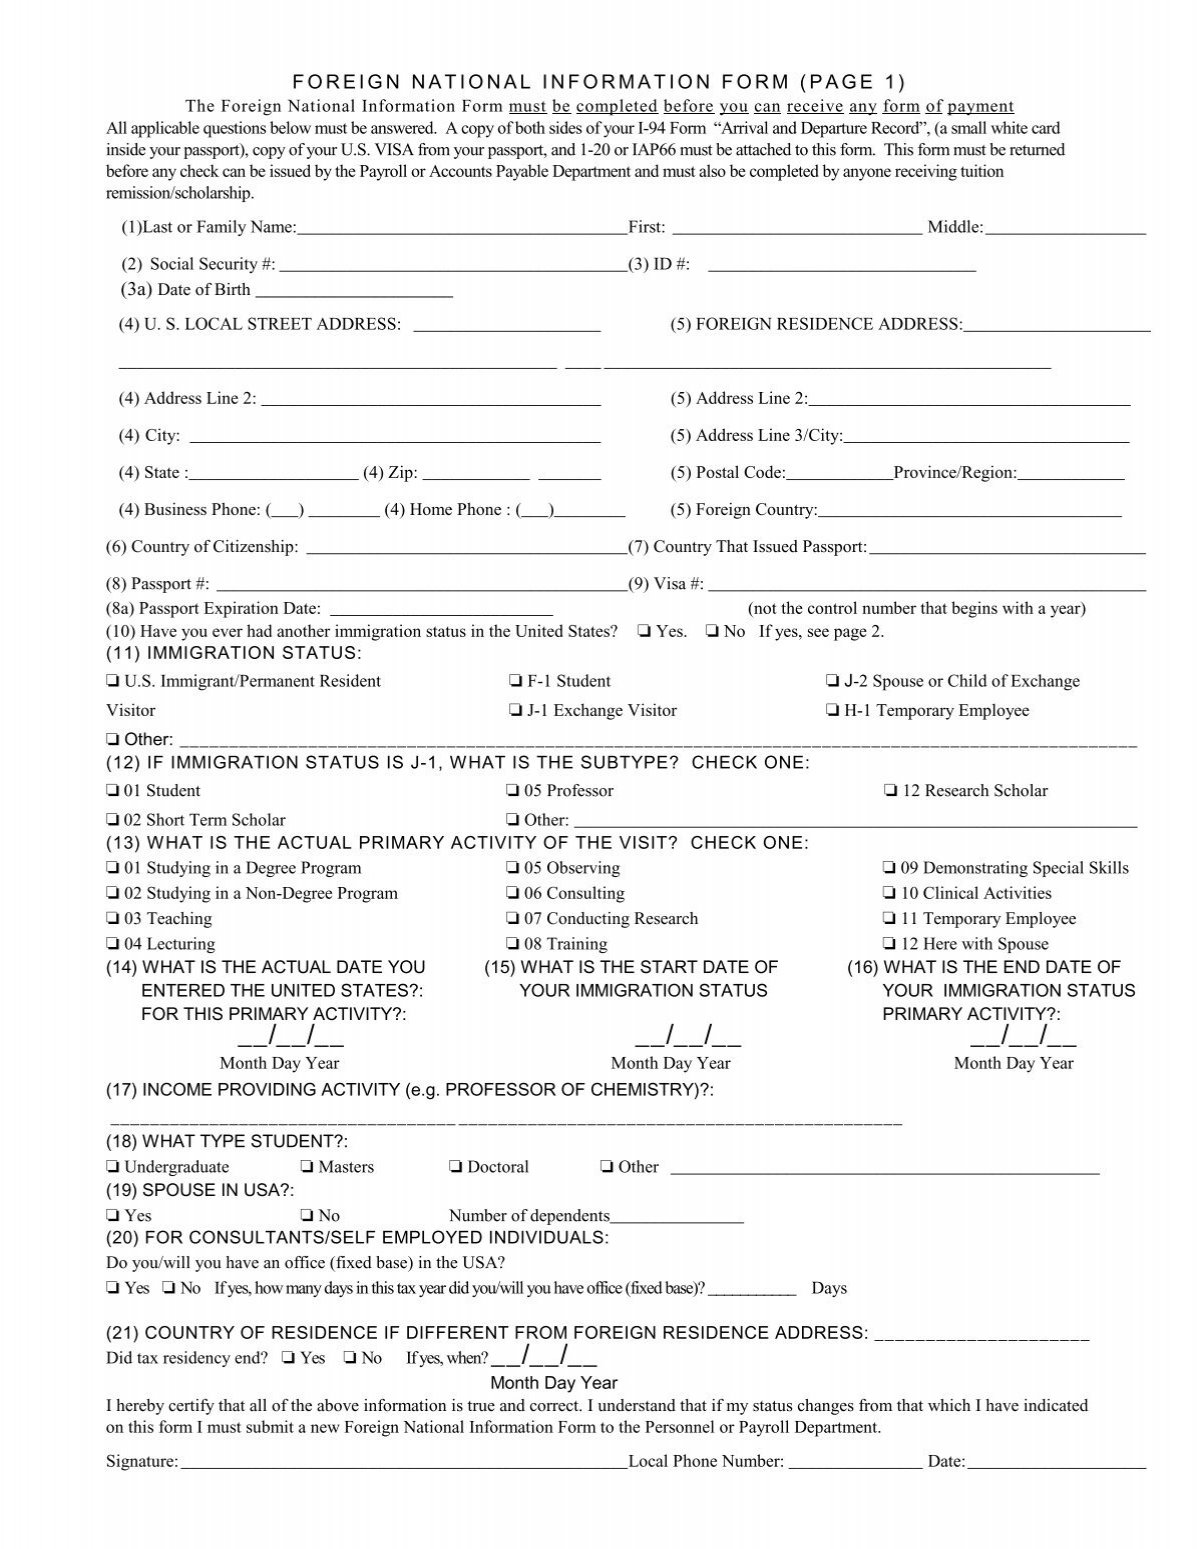 foreign-national-information-form-page-1